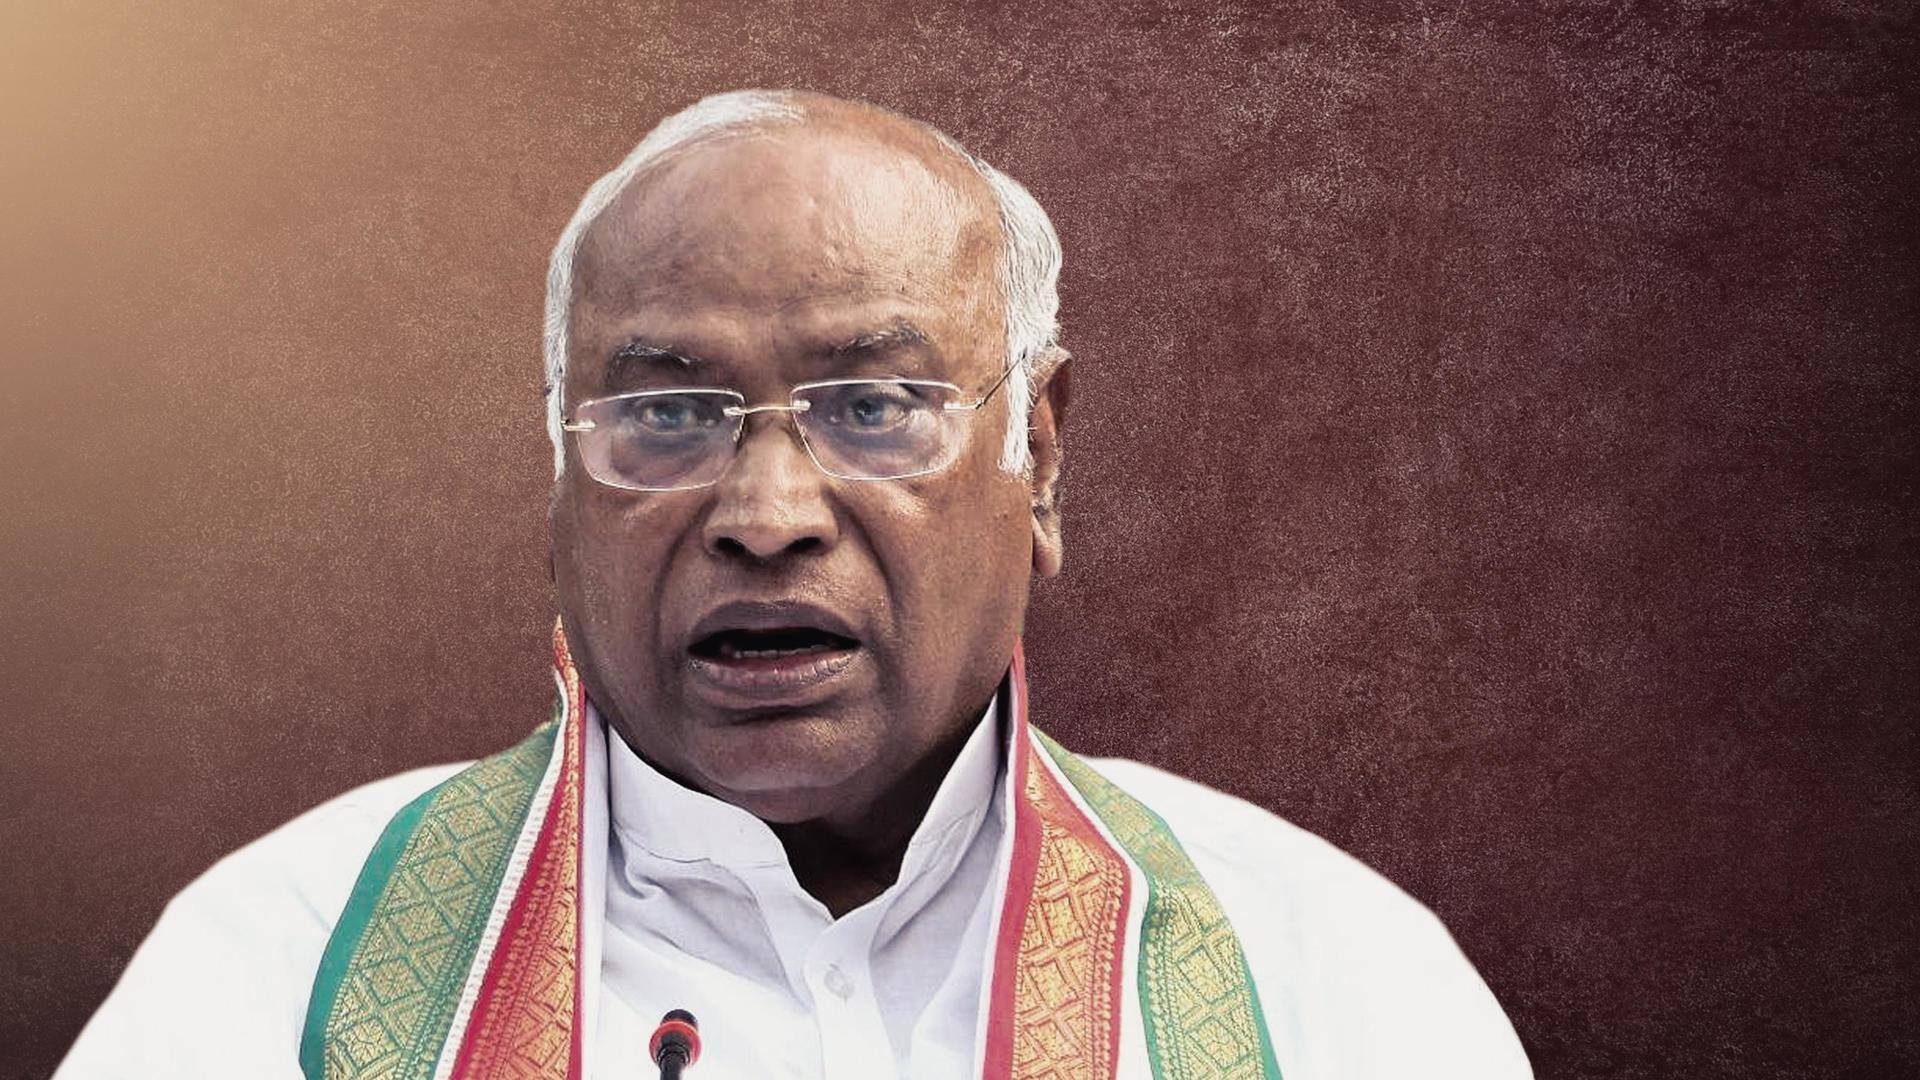 Congress chief Kharge compares Modi with Raavan, BJP hits back